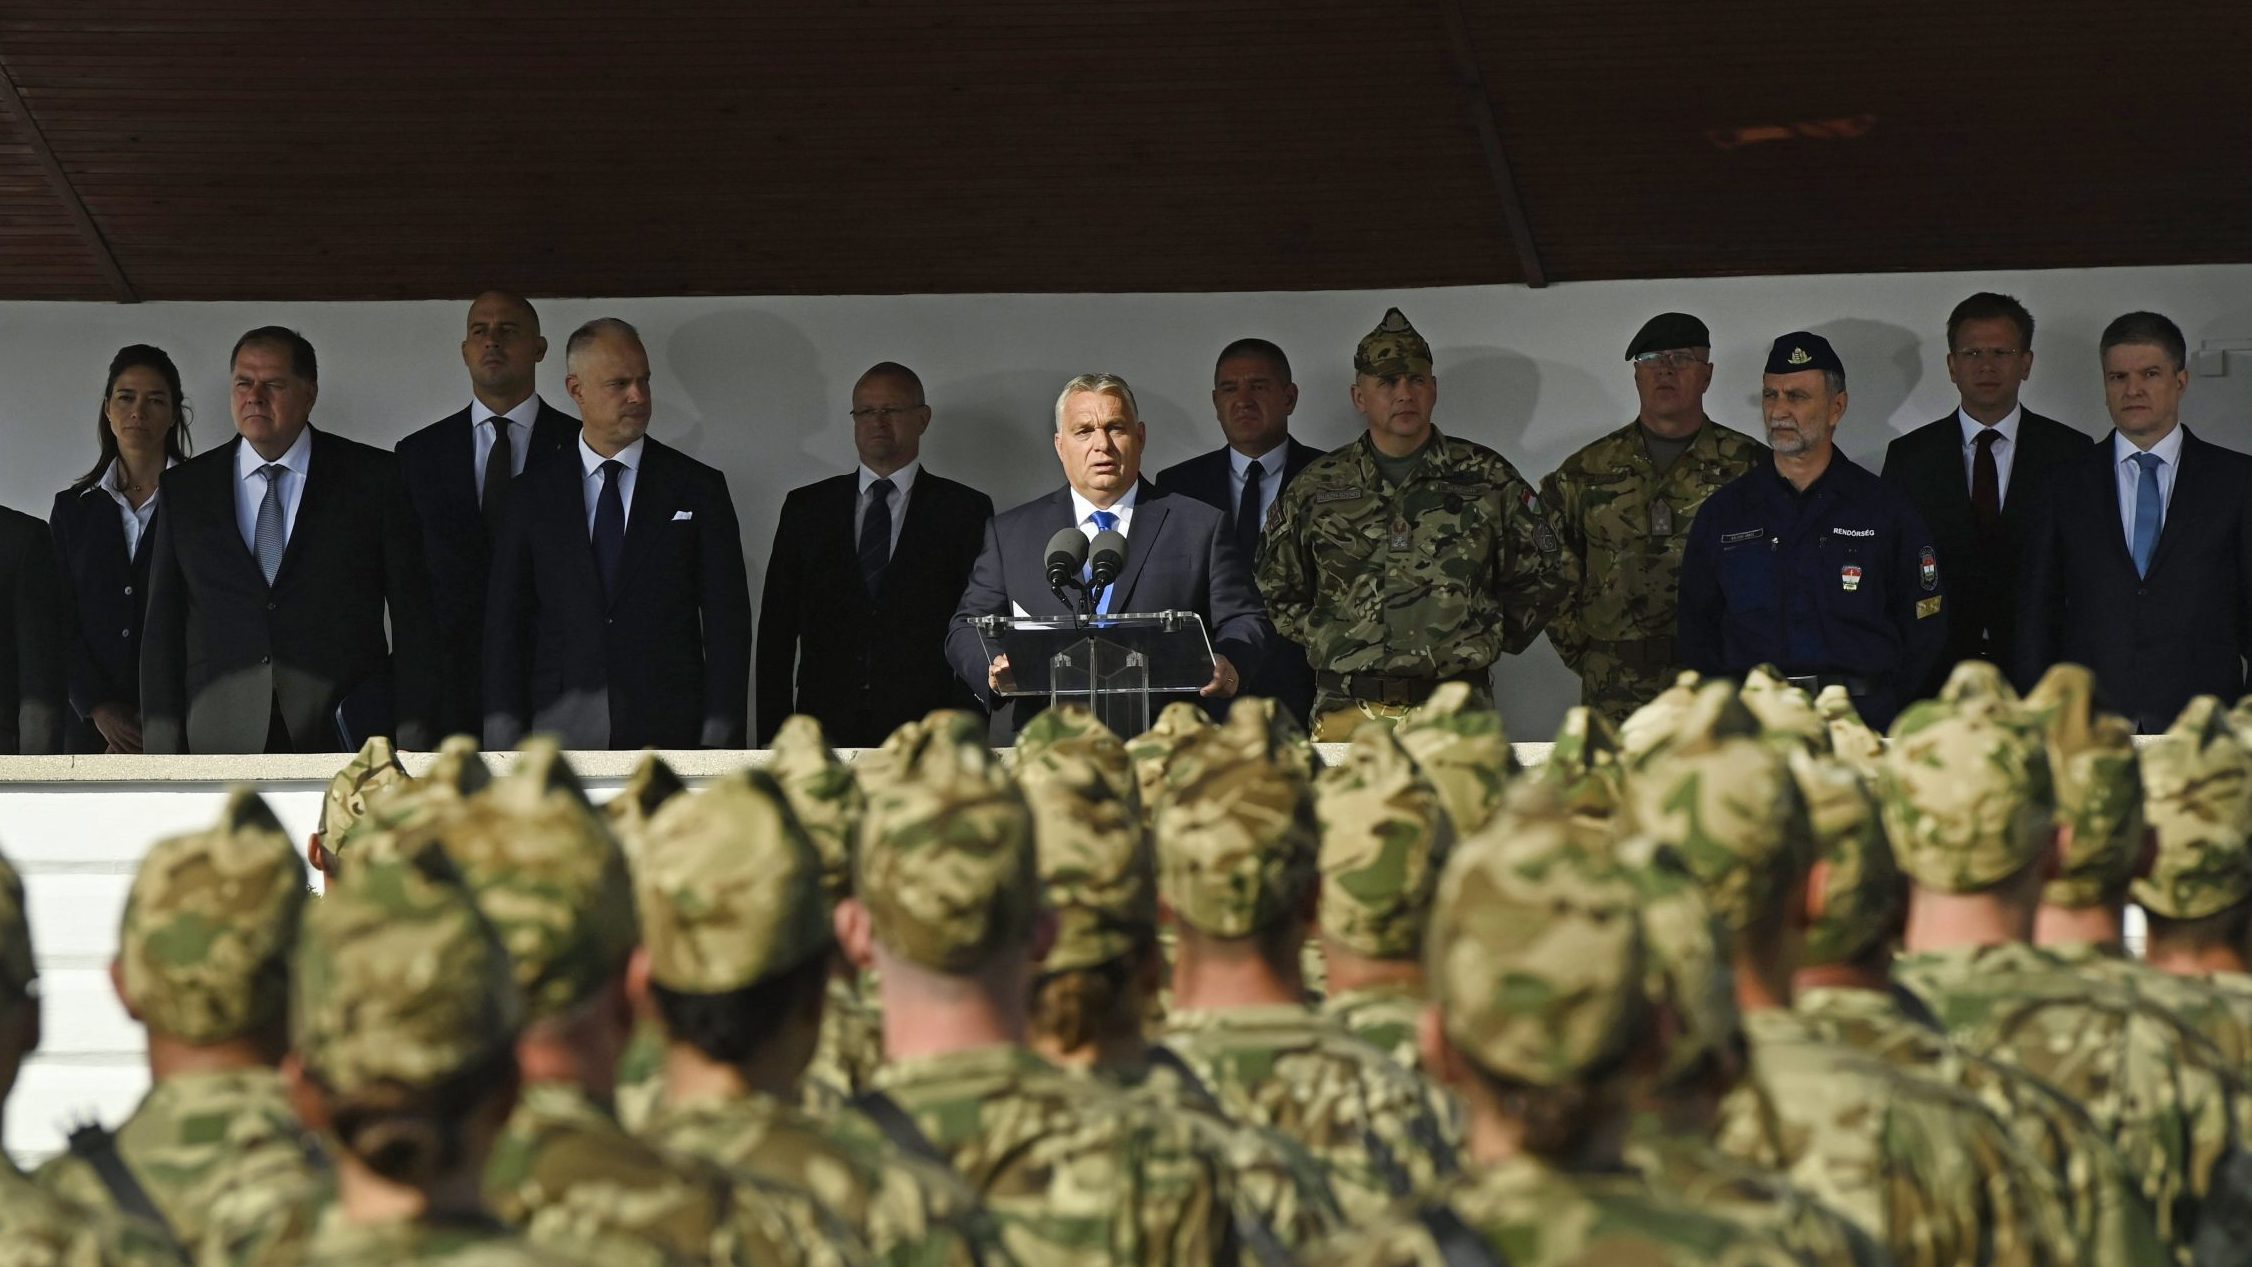 Viktor Orbán pledges to strengthen the Hungarian army